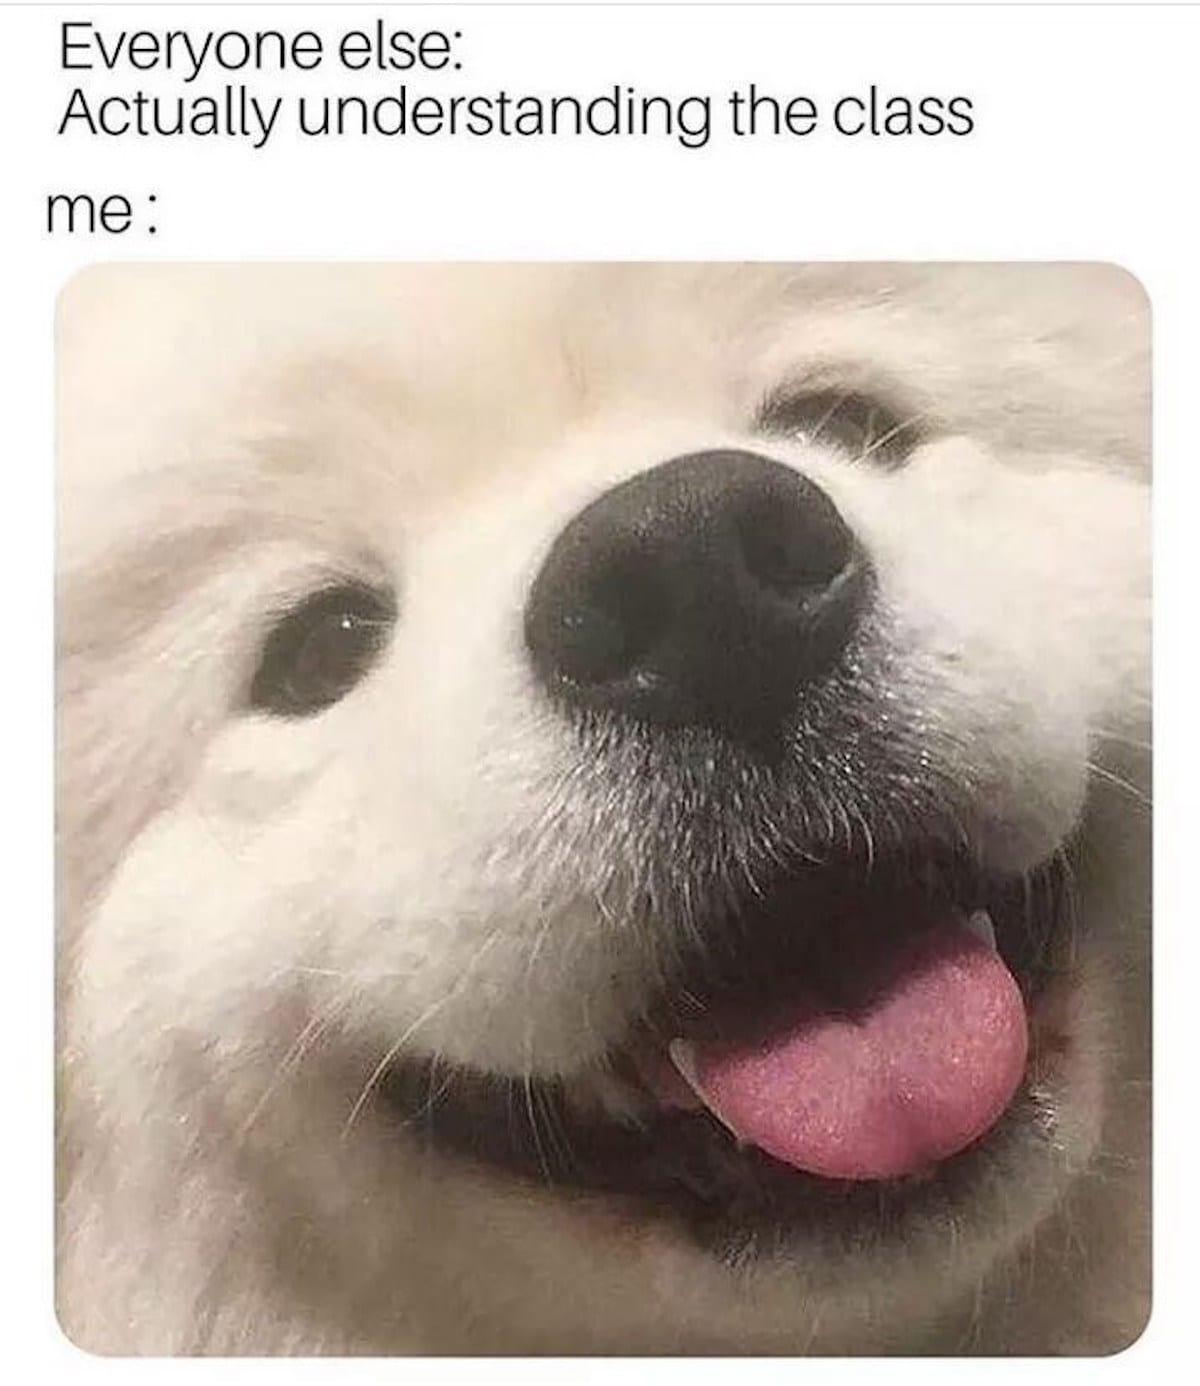 image of dog with text “Everyone else: actually understanding the class"